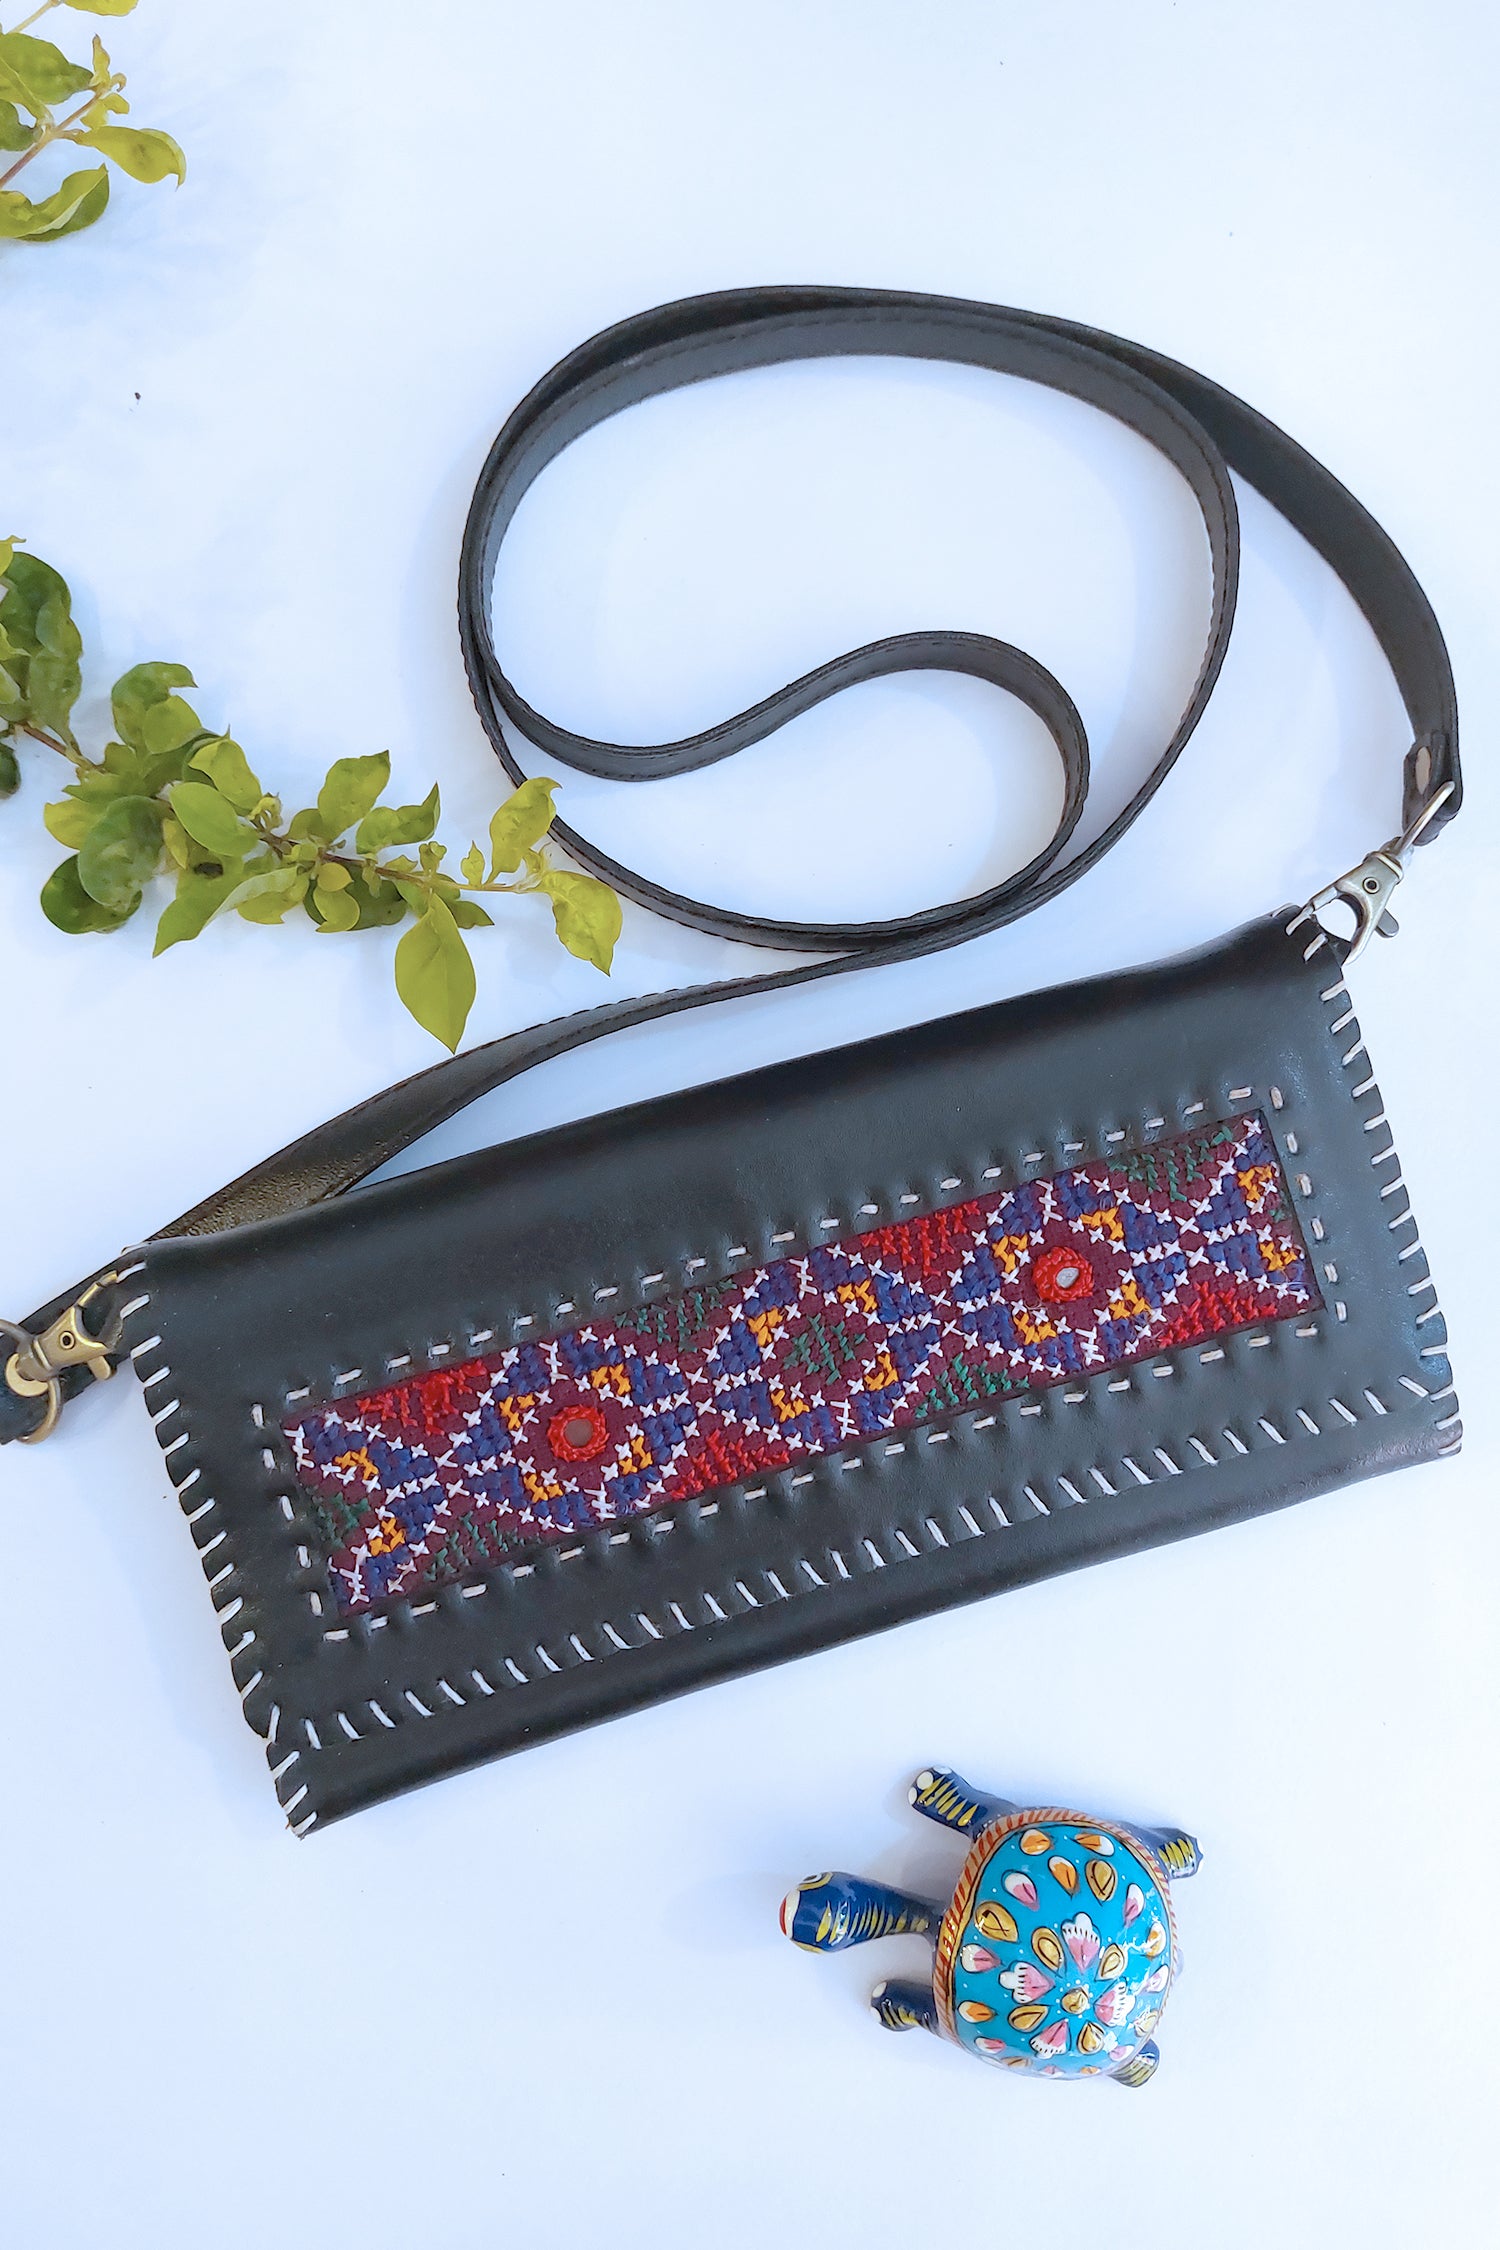 Handcrafted Genuine Leather Wallet with Jat Embroidery and Detachable Sling Sling Bag Handcrafted Genuine Leather Wallet with Jat Embroidery and Detachable Sling Sling Bag 